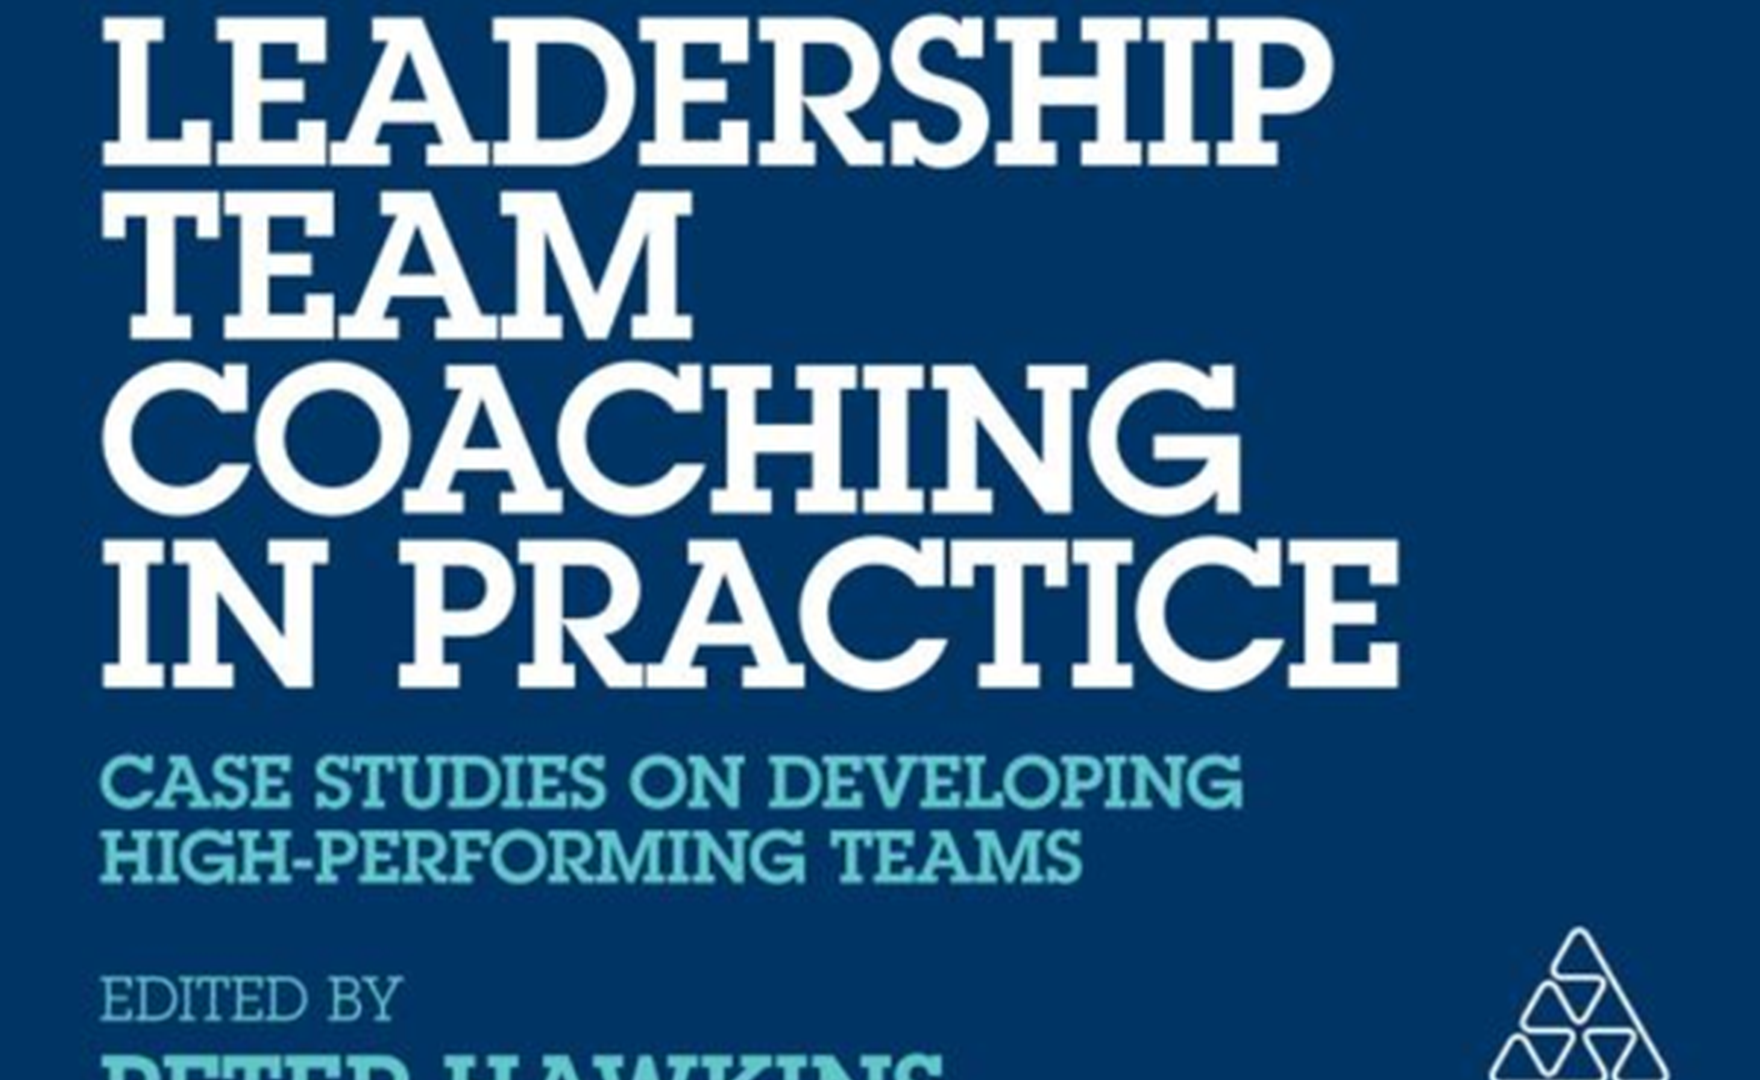 Book Review: Leadership Team Coaching in Practice